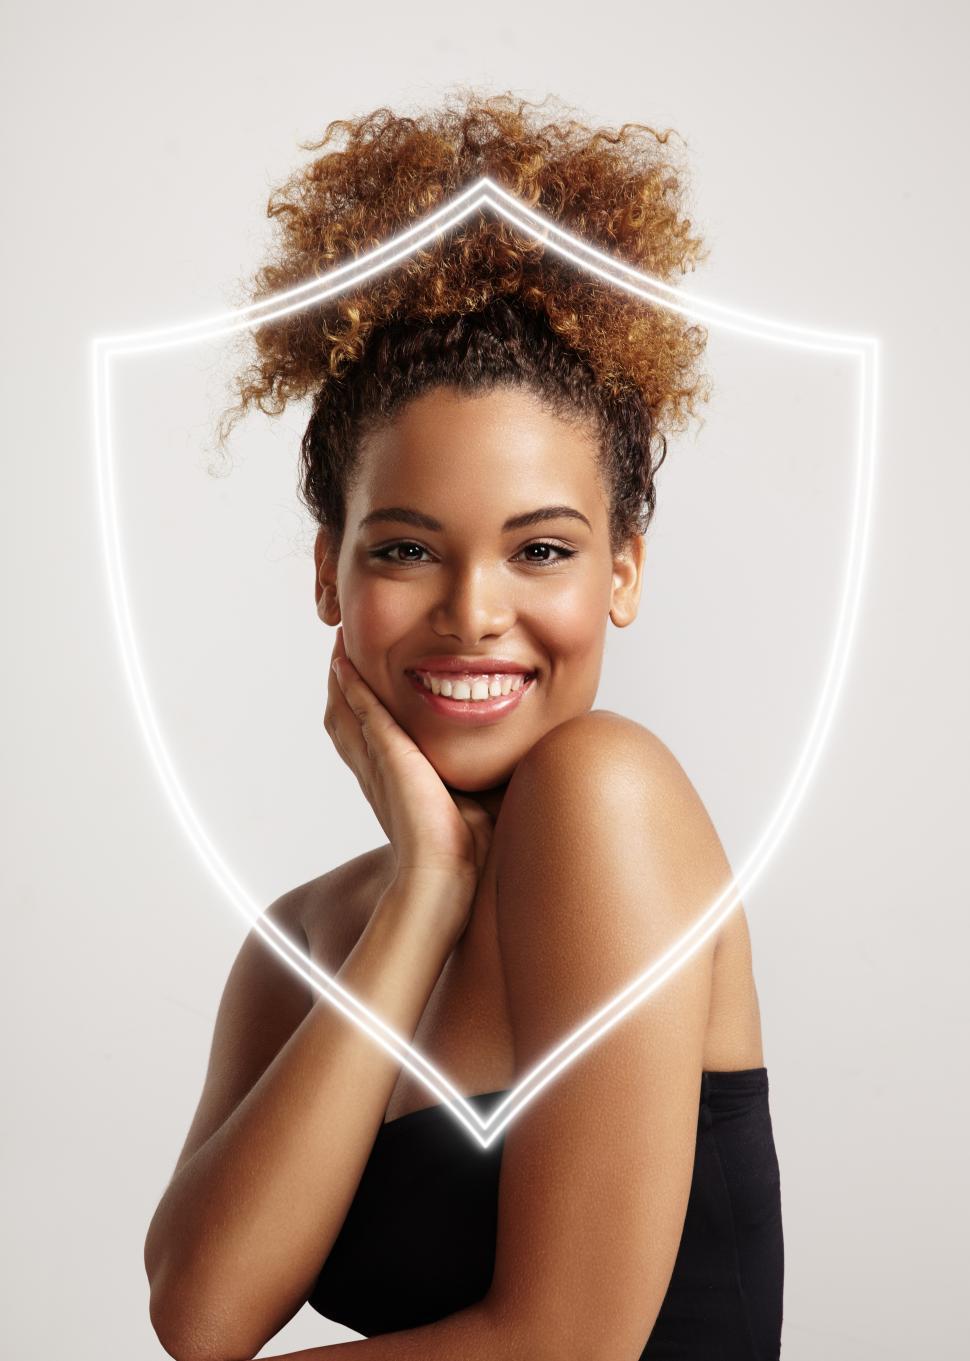 Free Image of happy woman behind the shield illustration, protecting skin from damage 